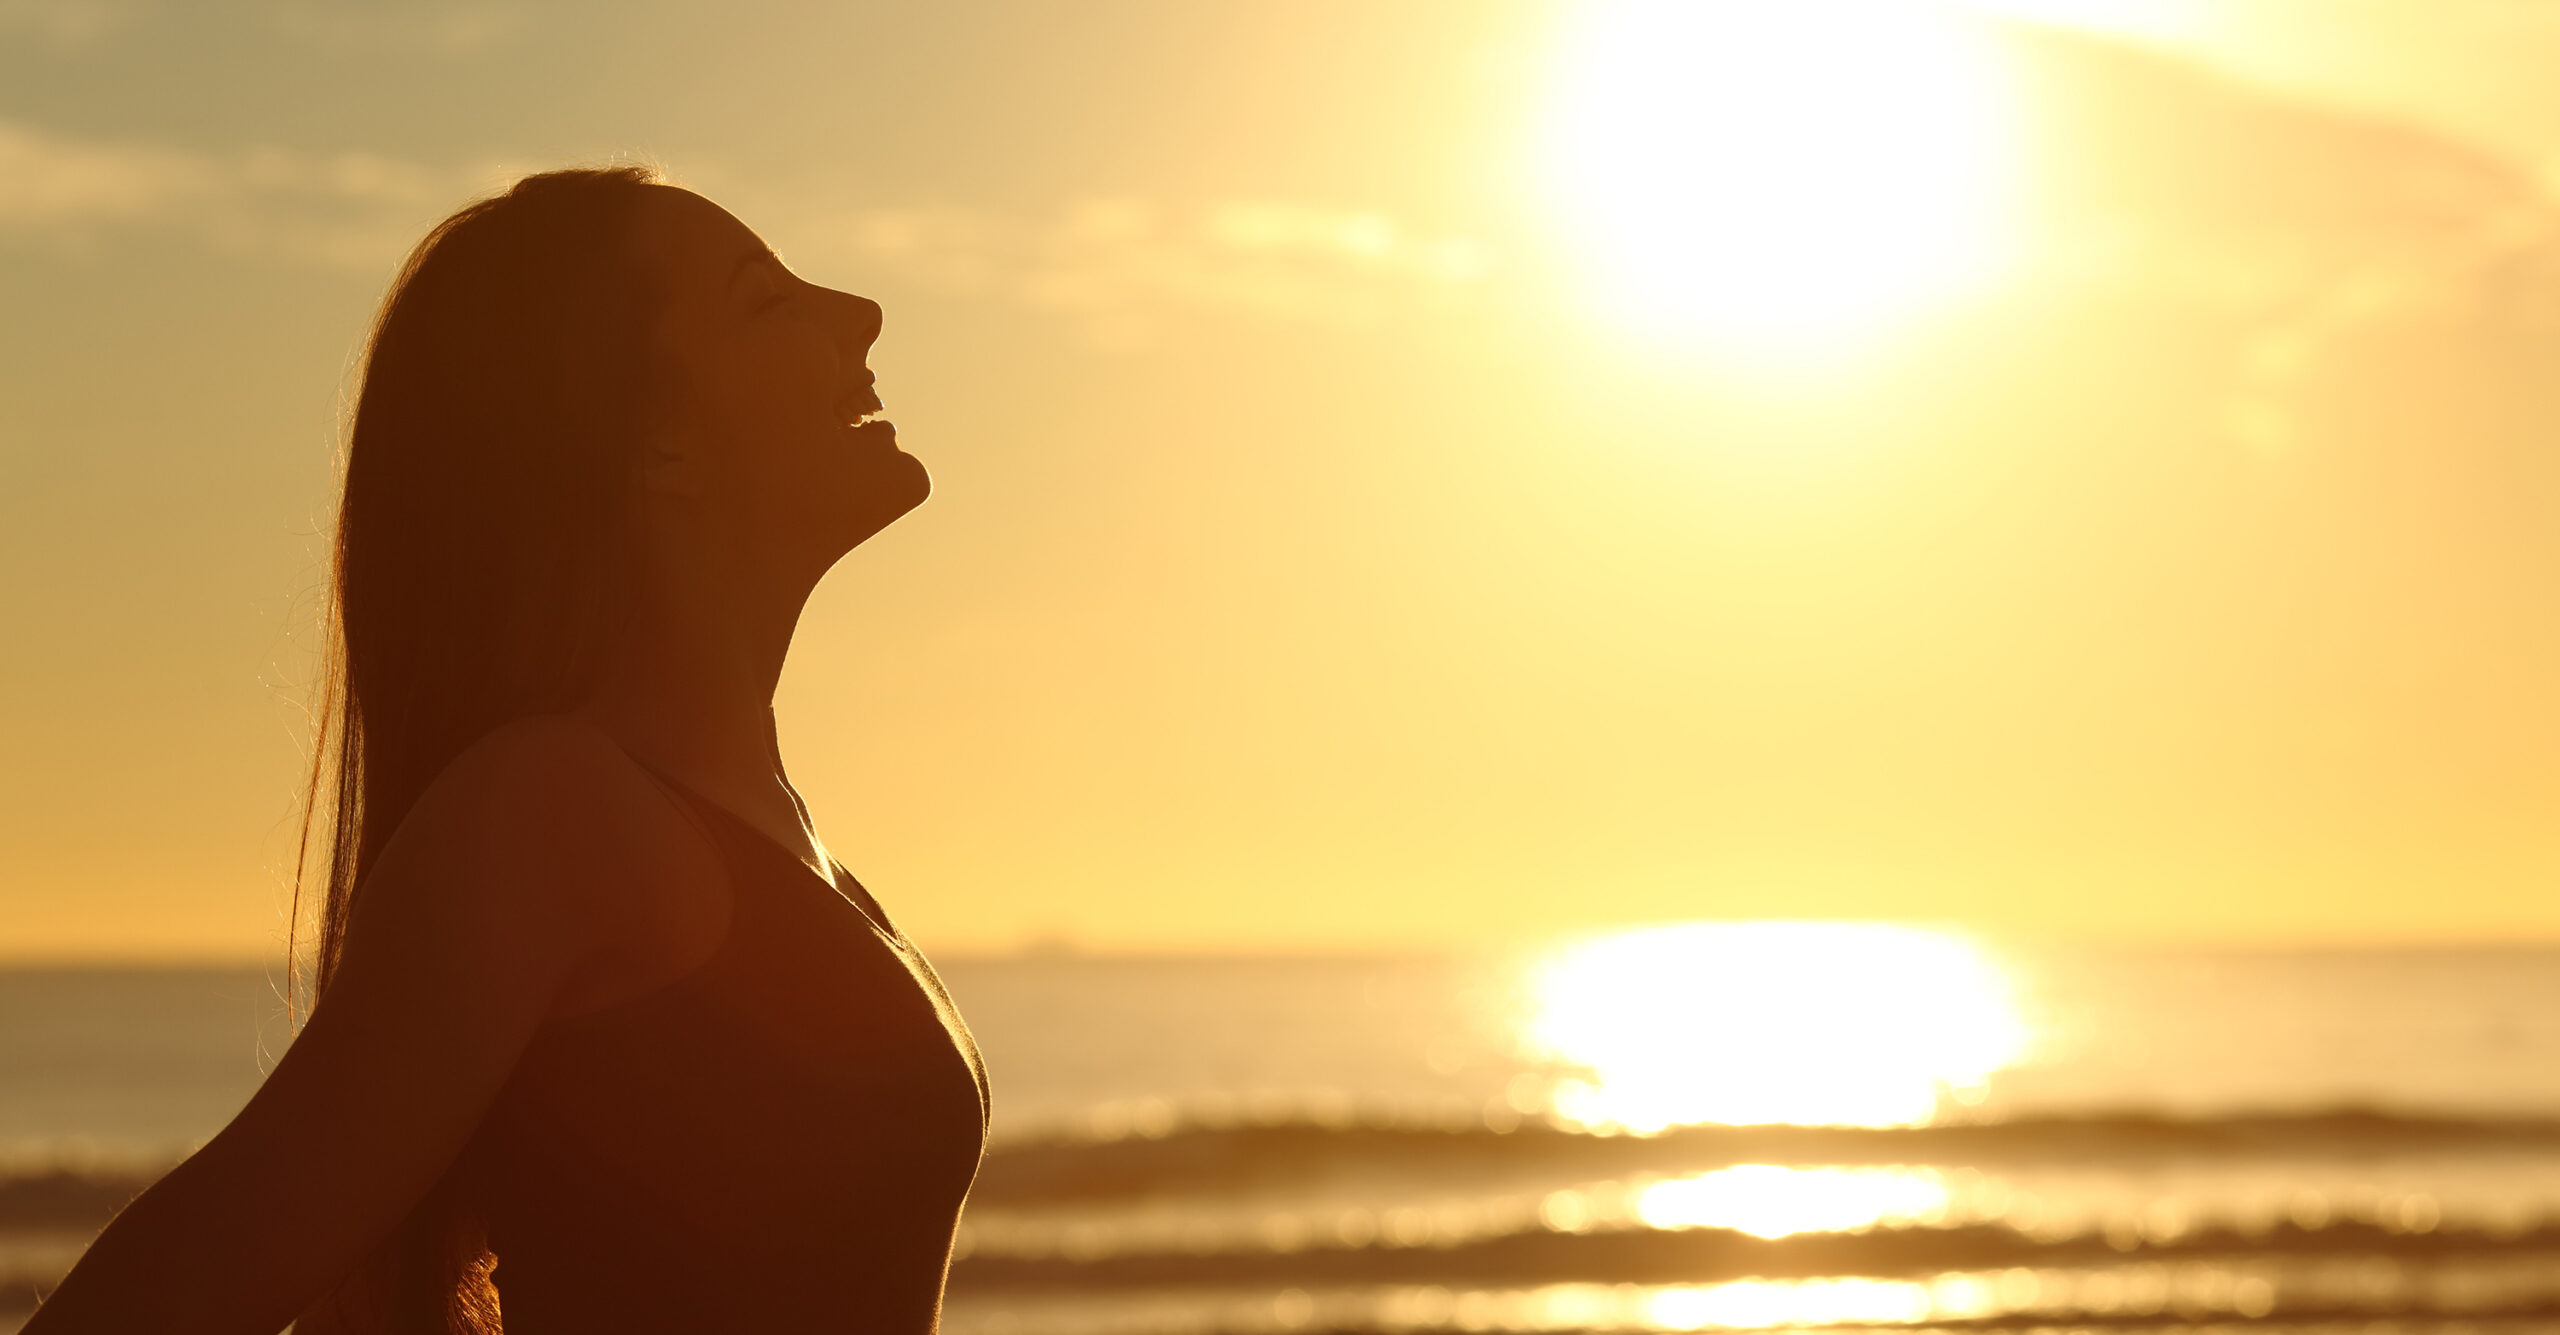 Silhouette of a smiling woman with the sun and ocean in the background.